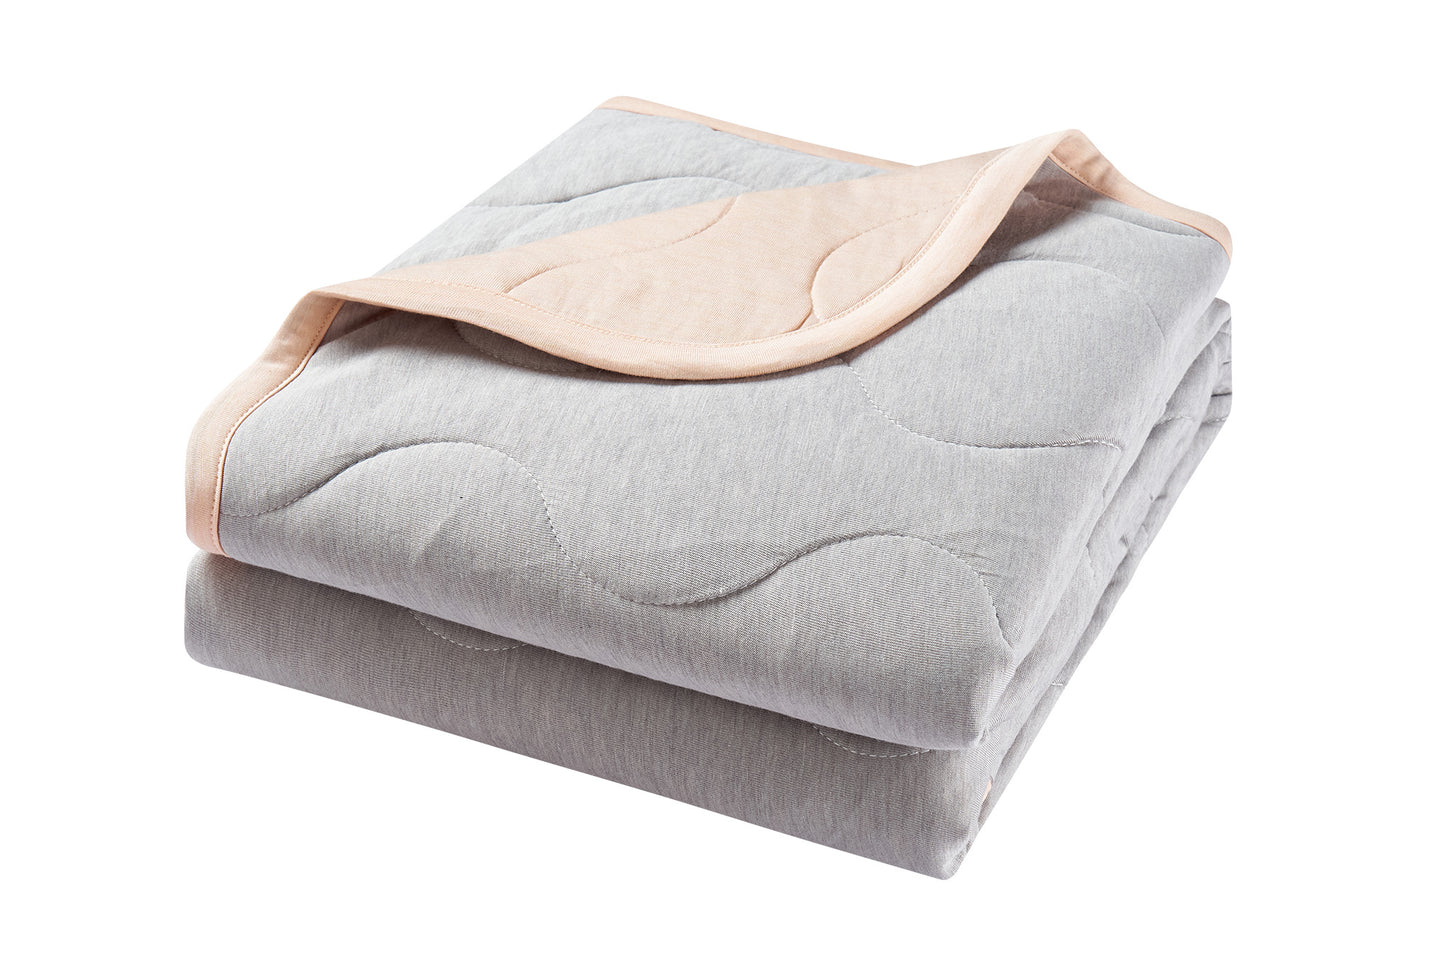 Load image into Gallery viewer, Small Cozy Blanket 2.0 TOG (Bamboo Jersey) - Pantone Bellini Drizzle
